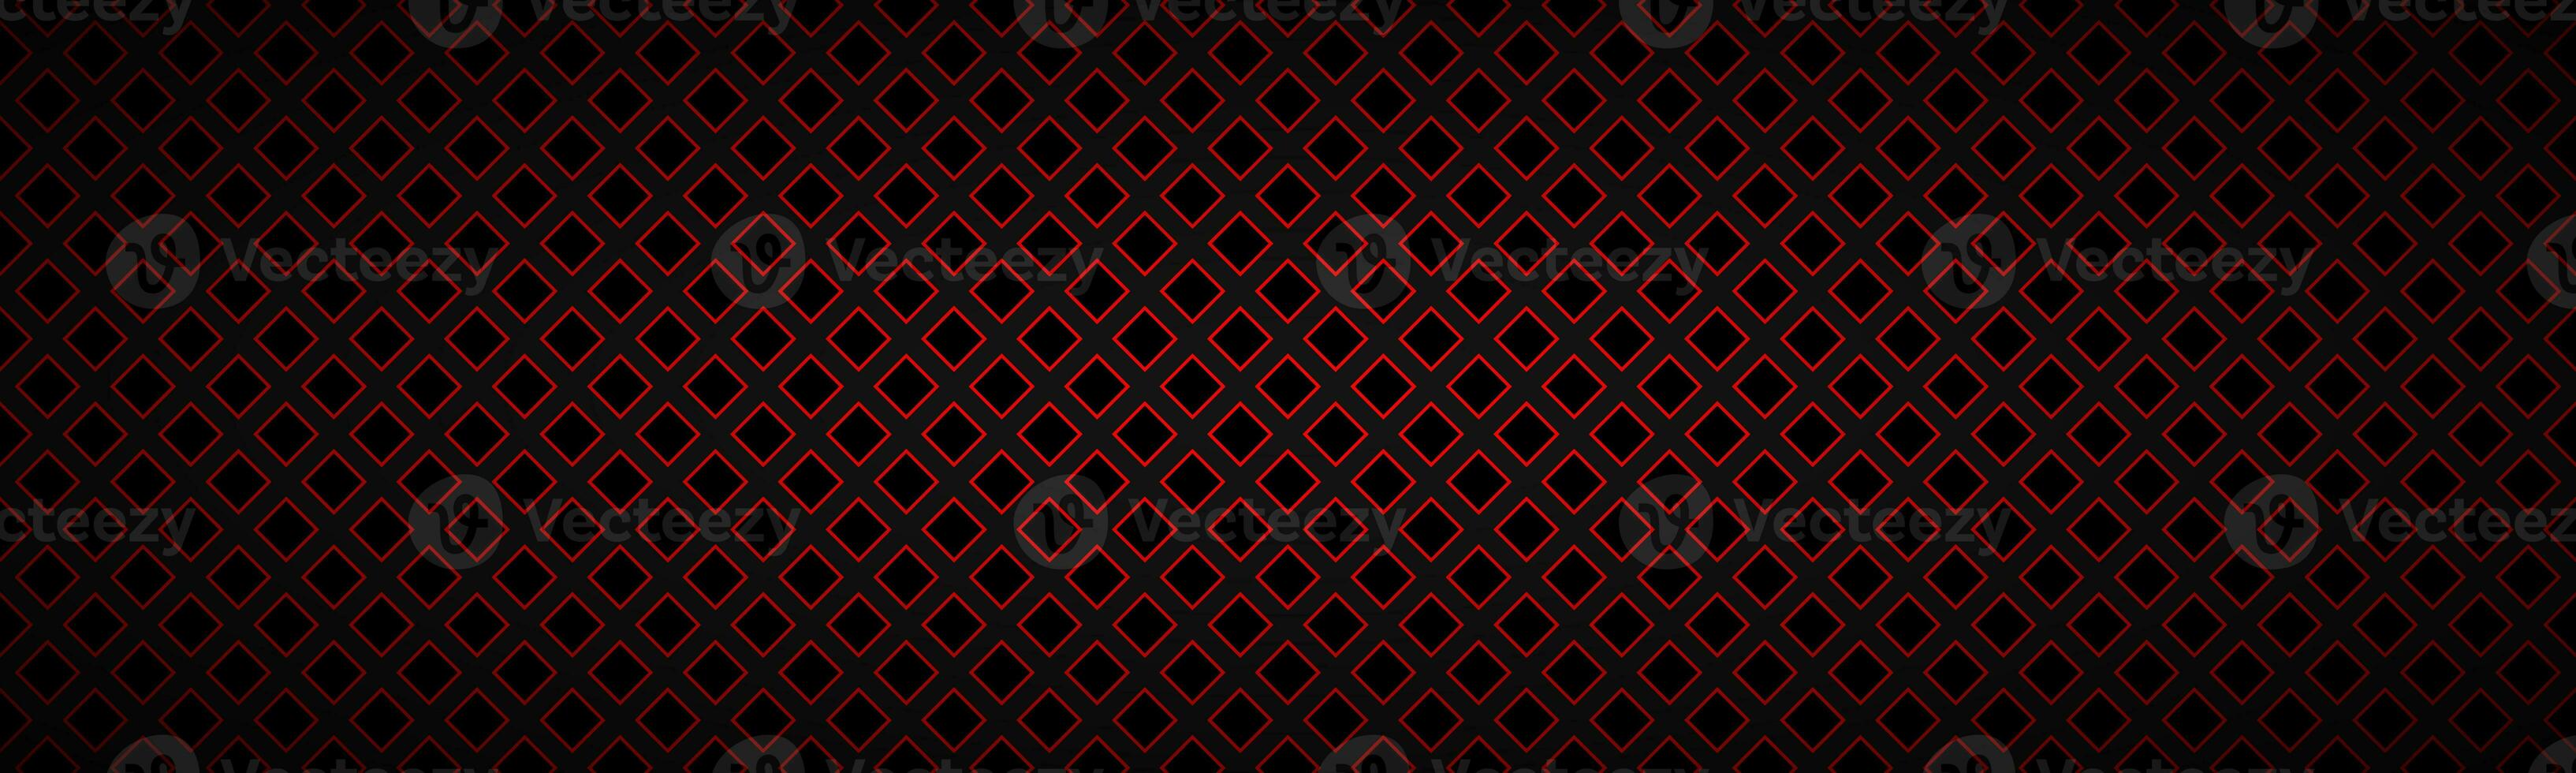 Black and red abstract header with outline of squares. Simple vector illustration photo